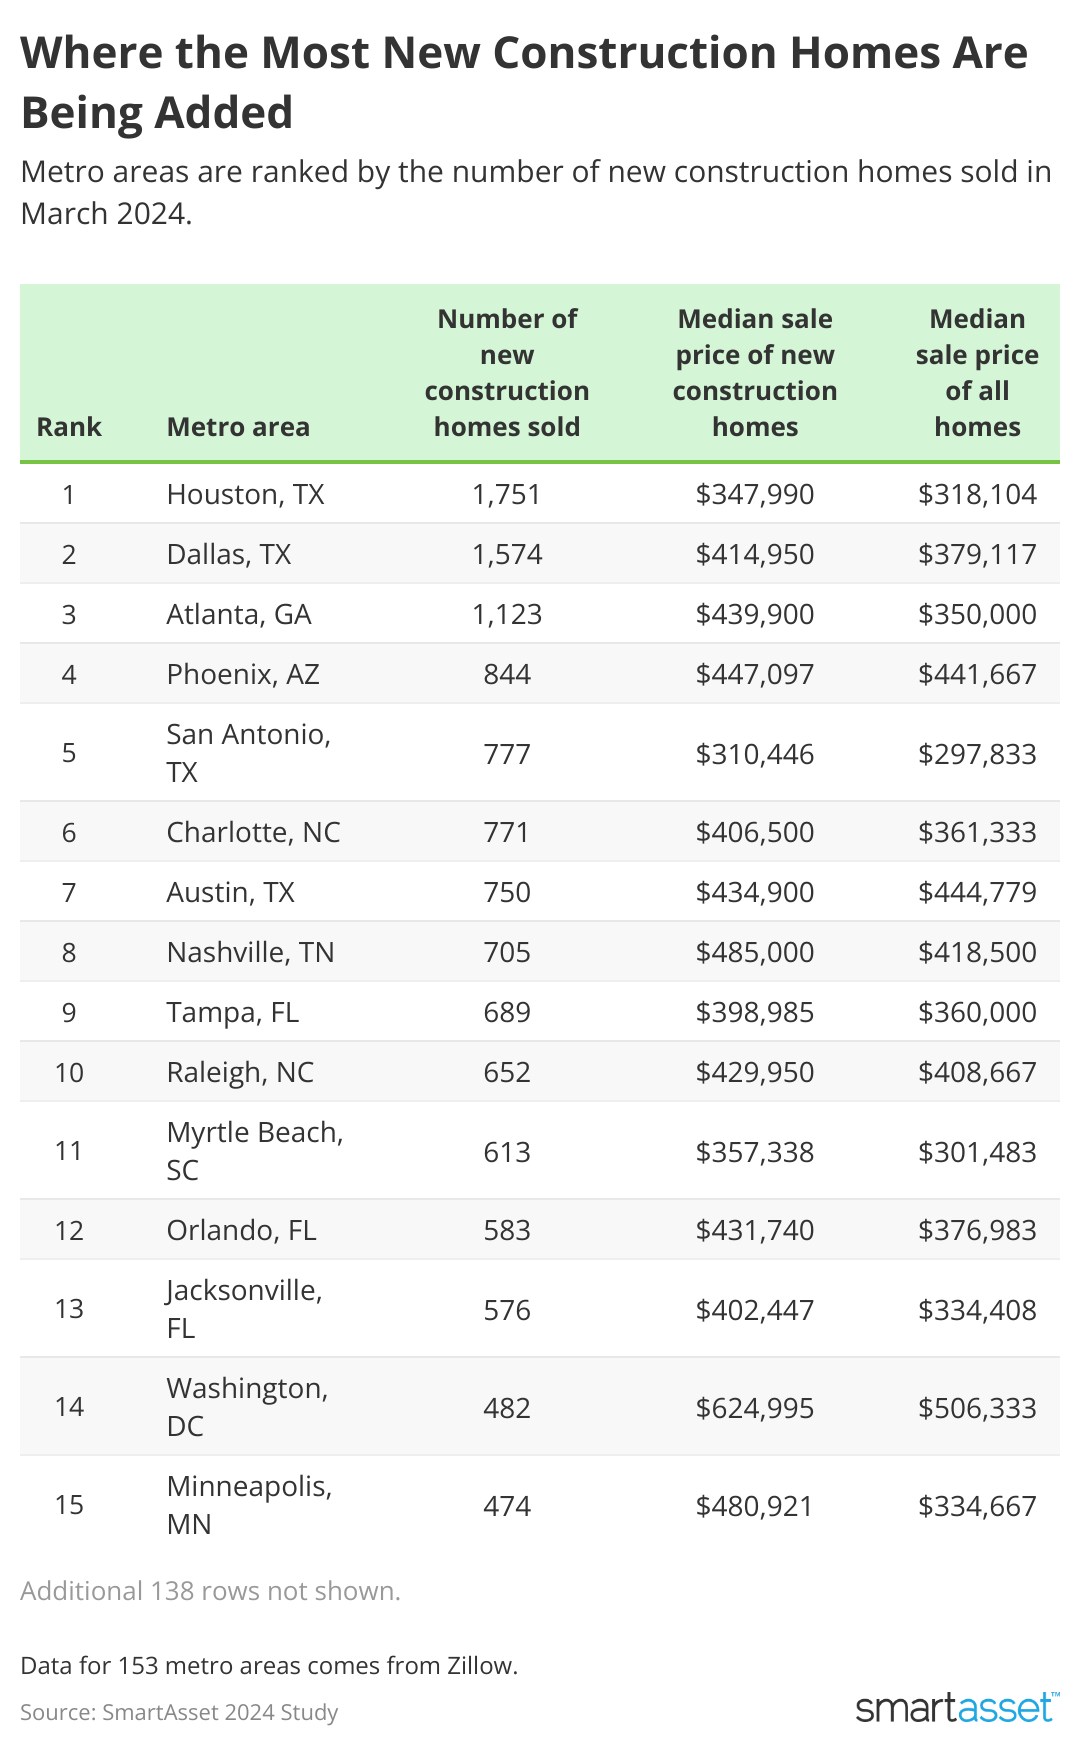 Table showing top 15 cities where the most new construction homes are being added.